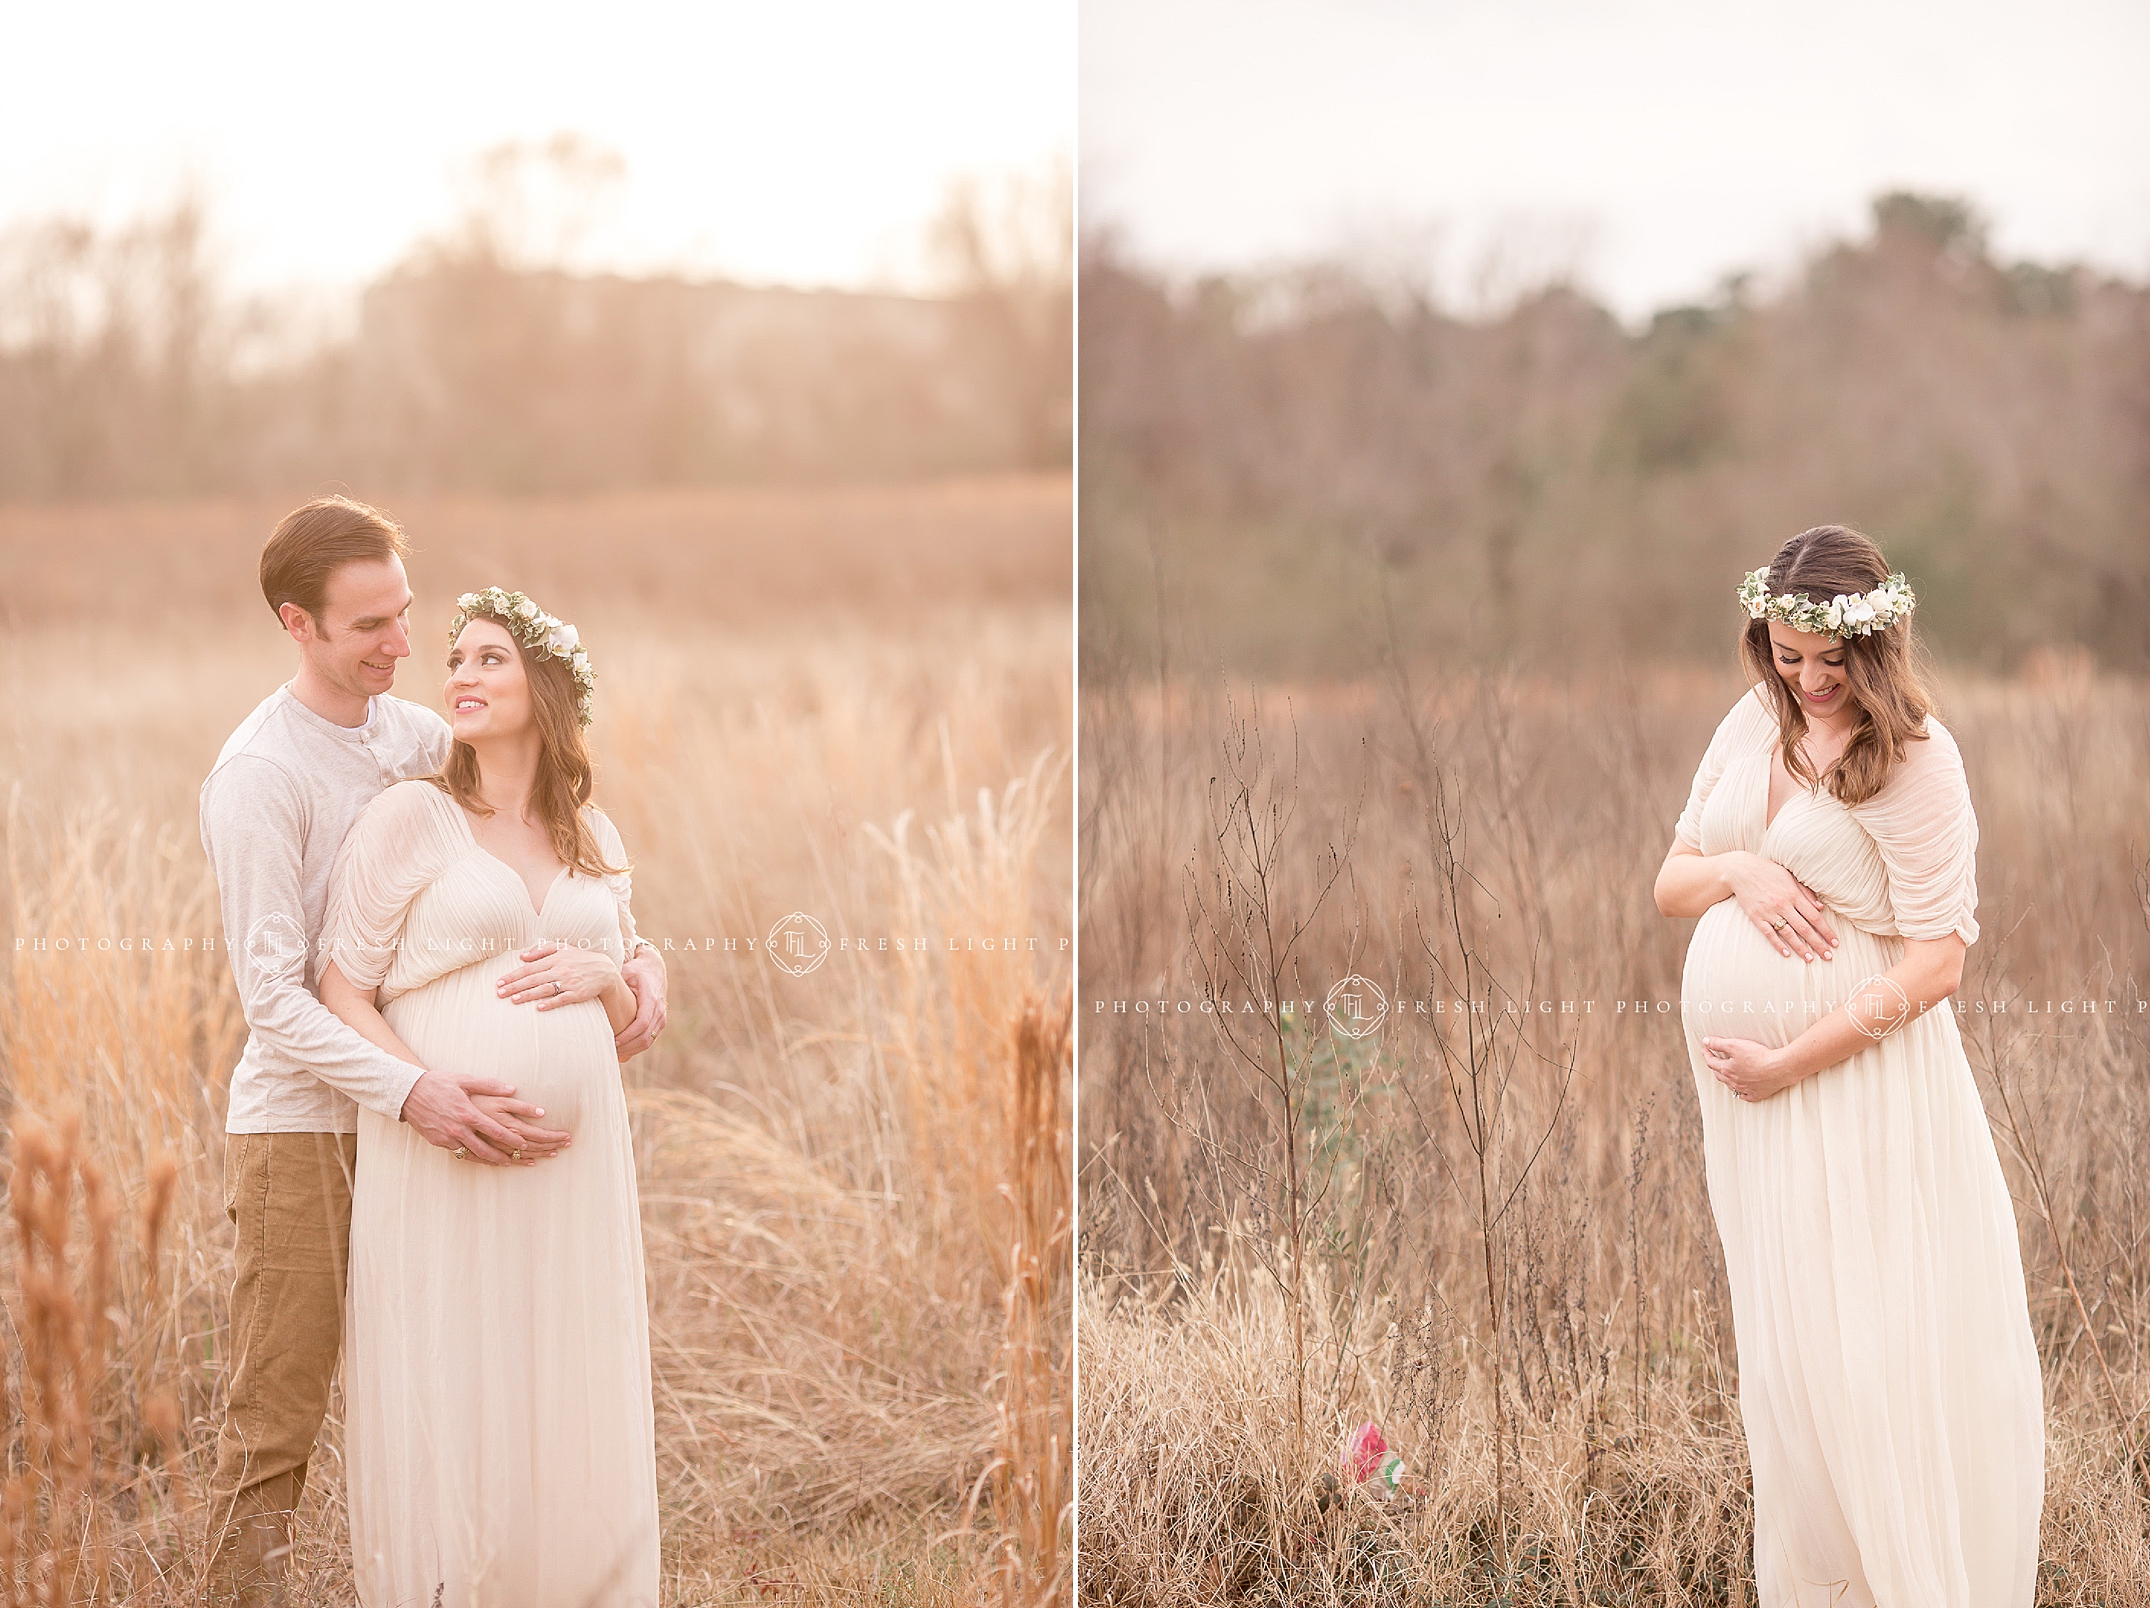 bhldn maternity dressed used during portrait session